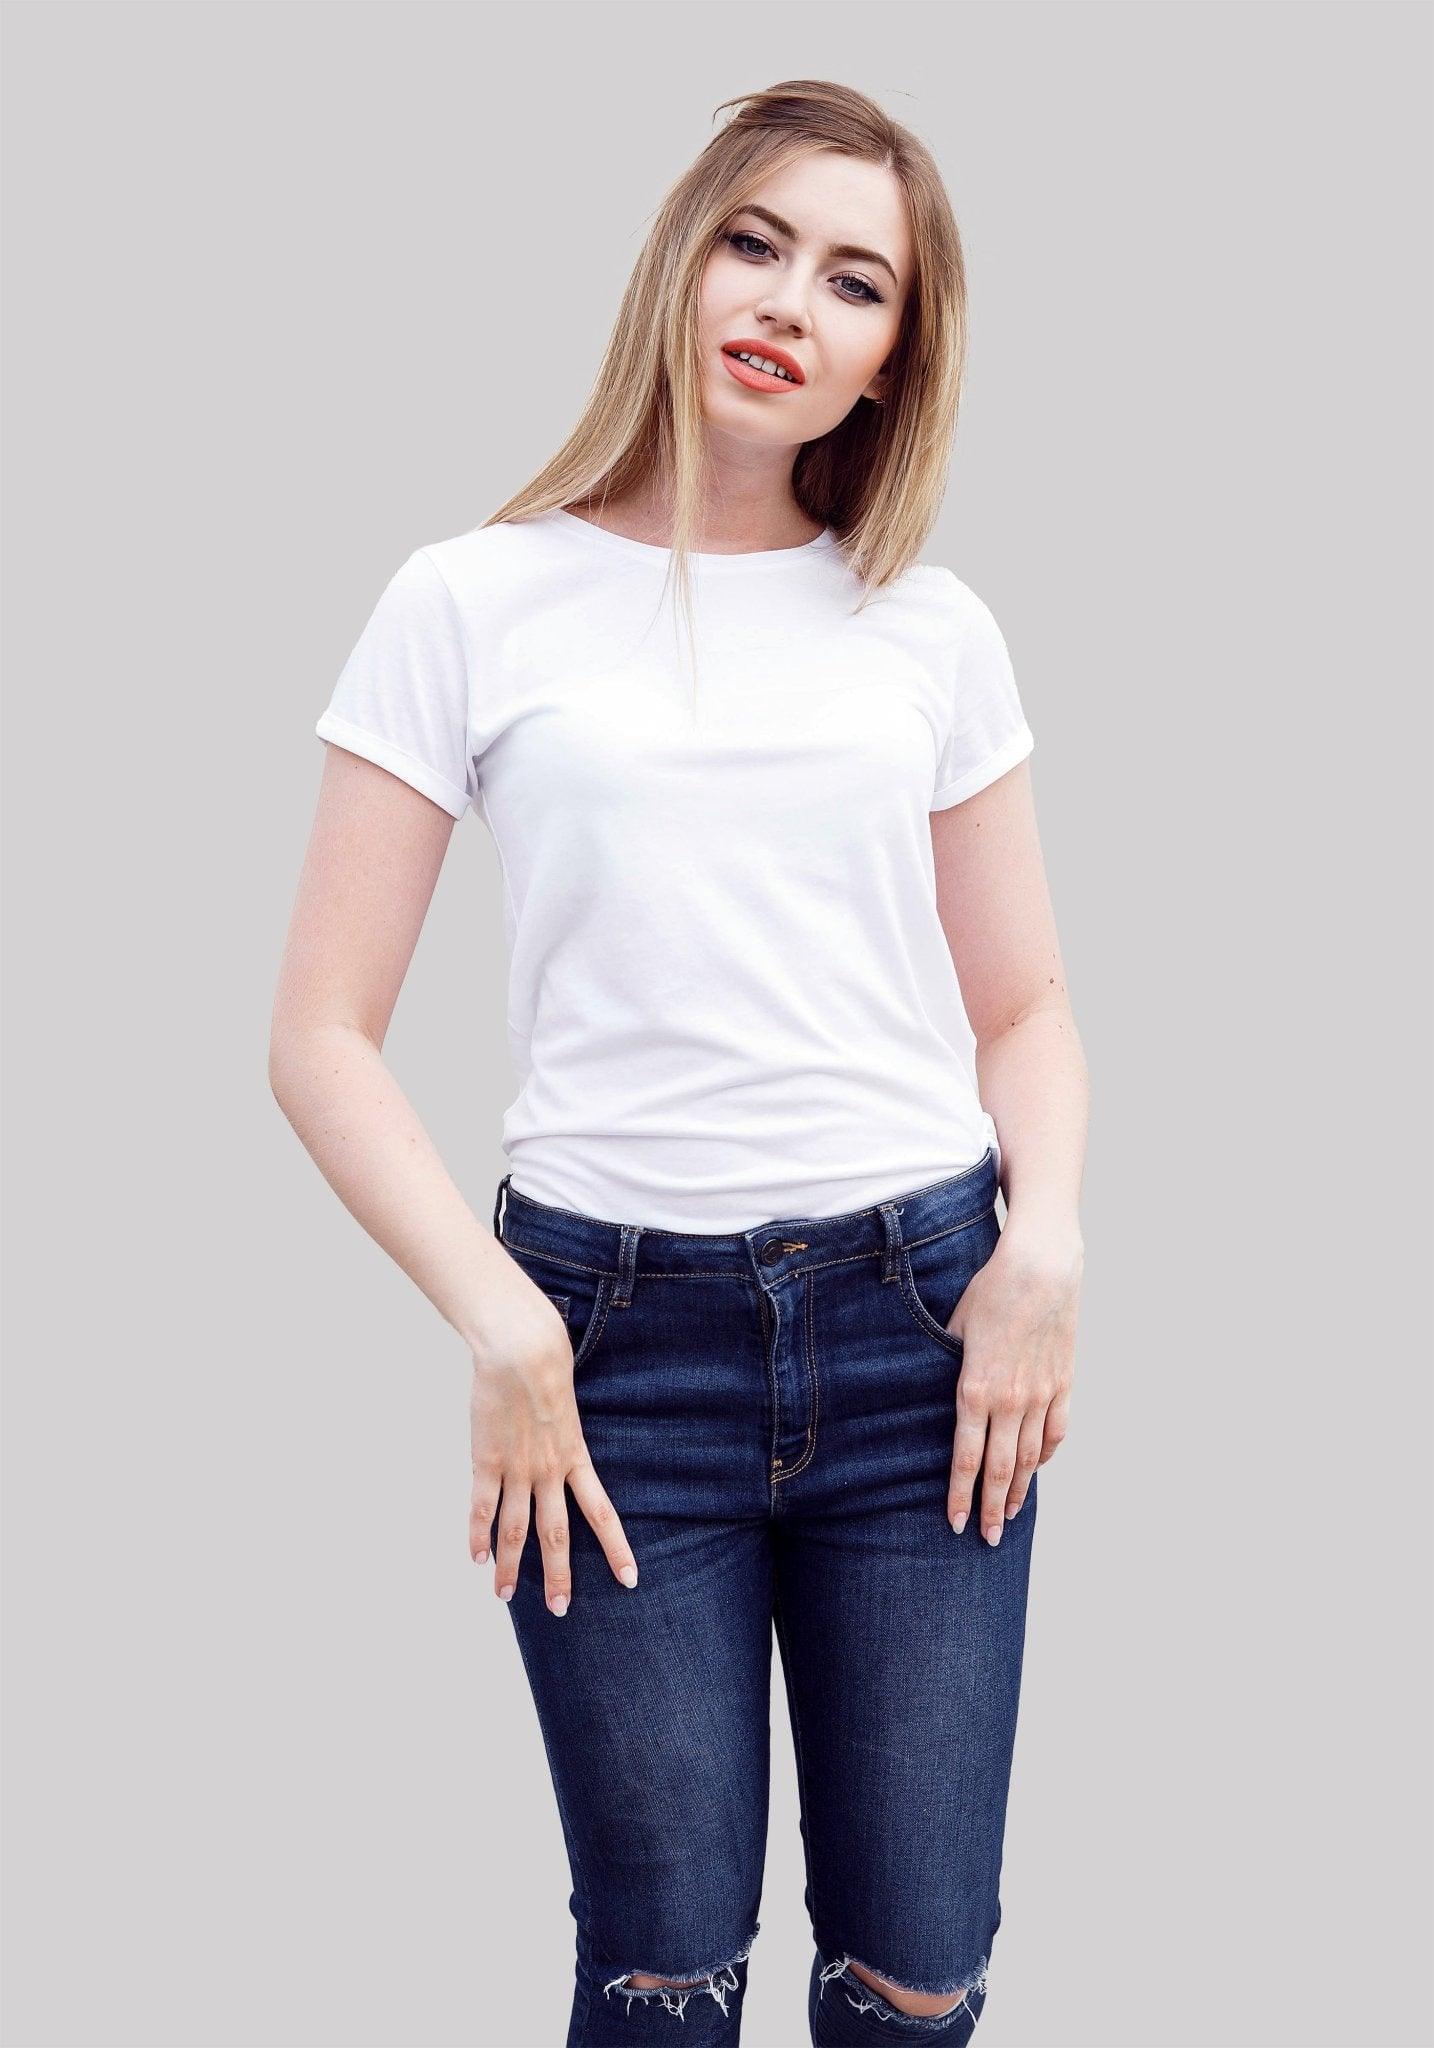 Solid Plain T Shirt For Women In Bright White Colour Variant